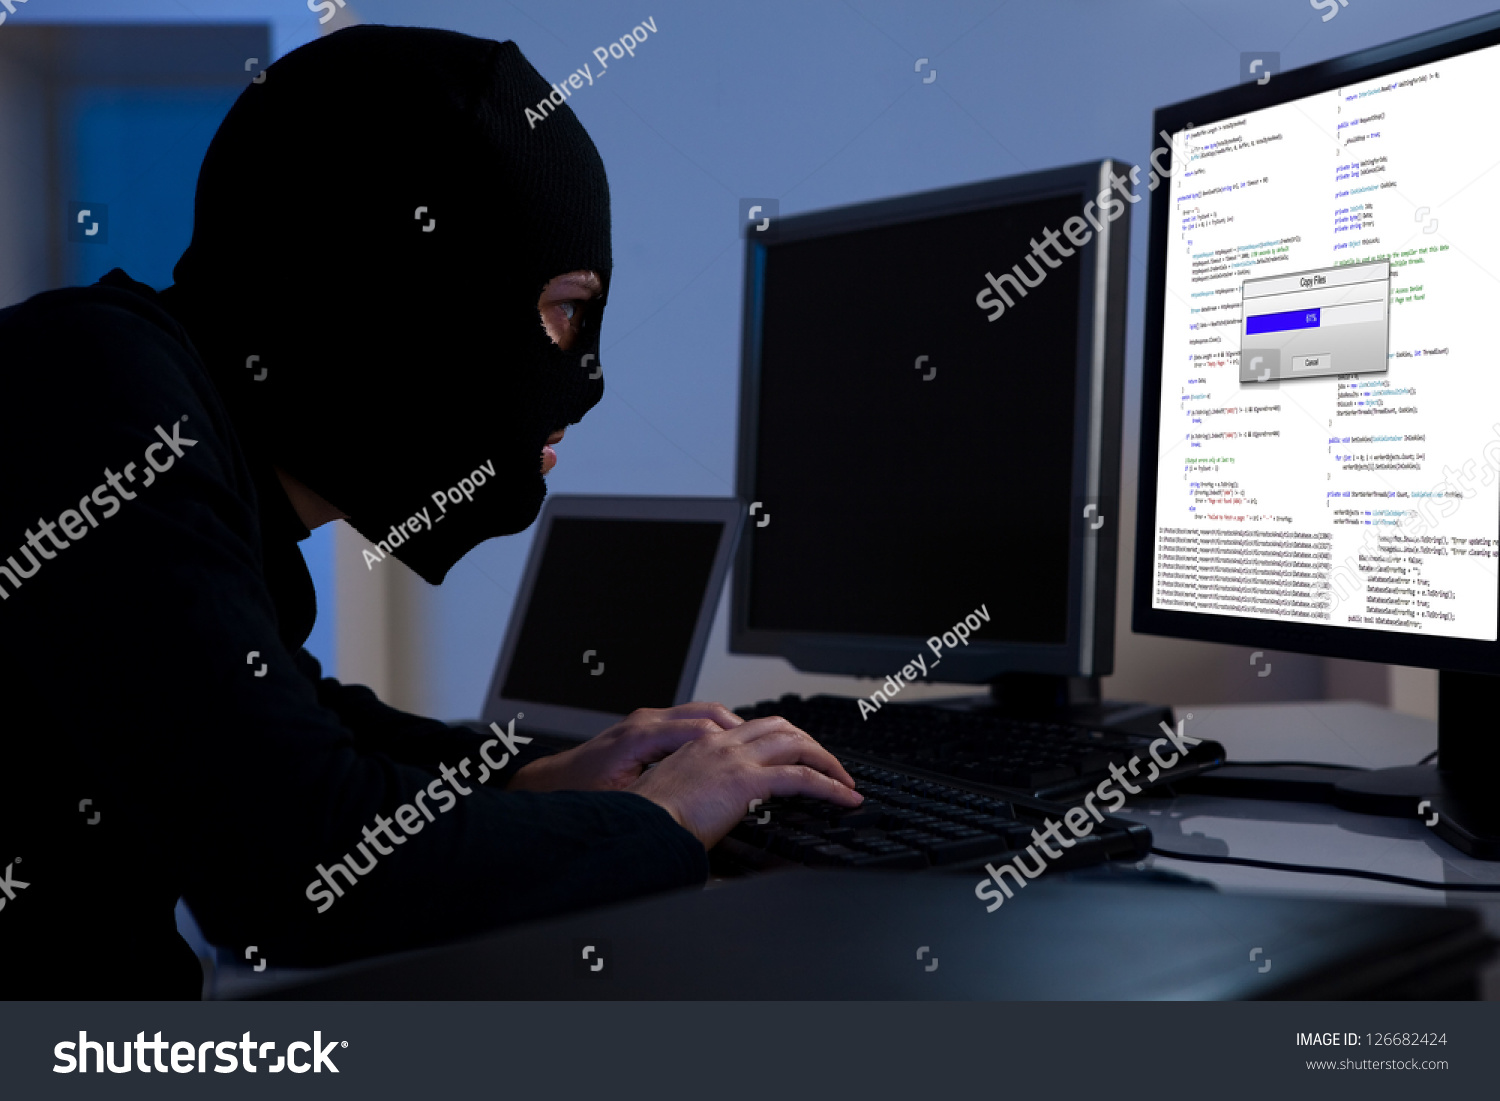 Masked hacker wearing a balaclava sitting at a desk downloading private information off a computer #126682424